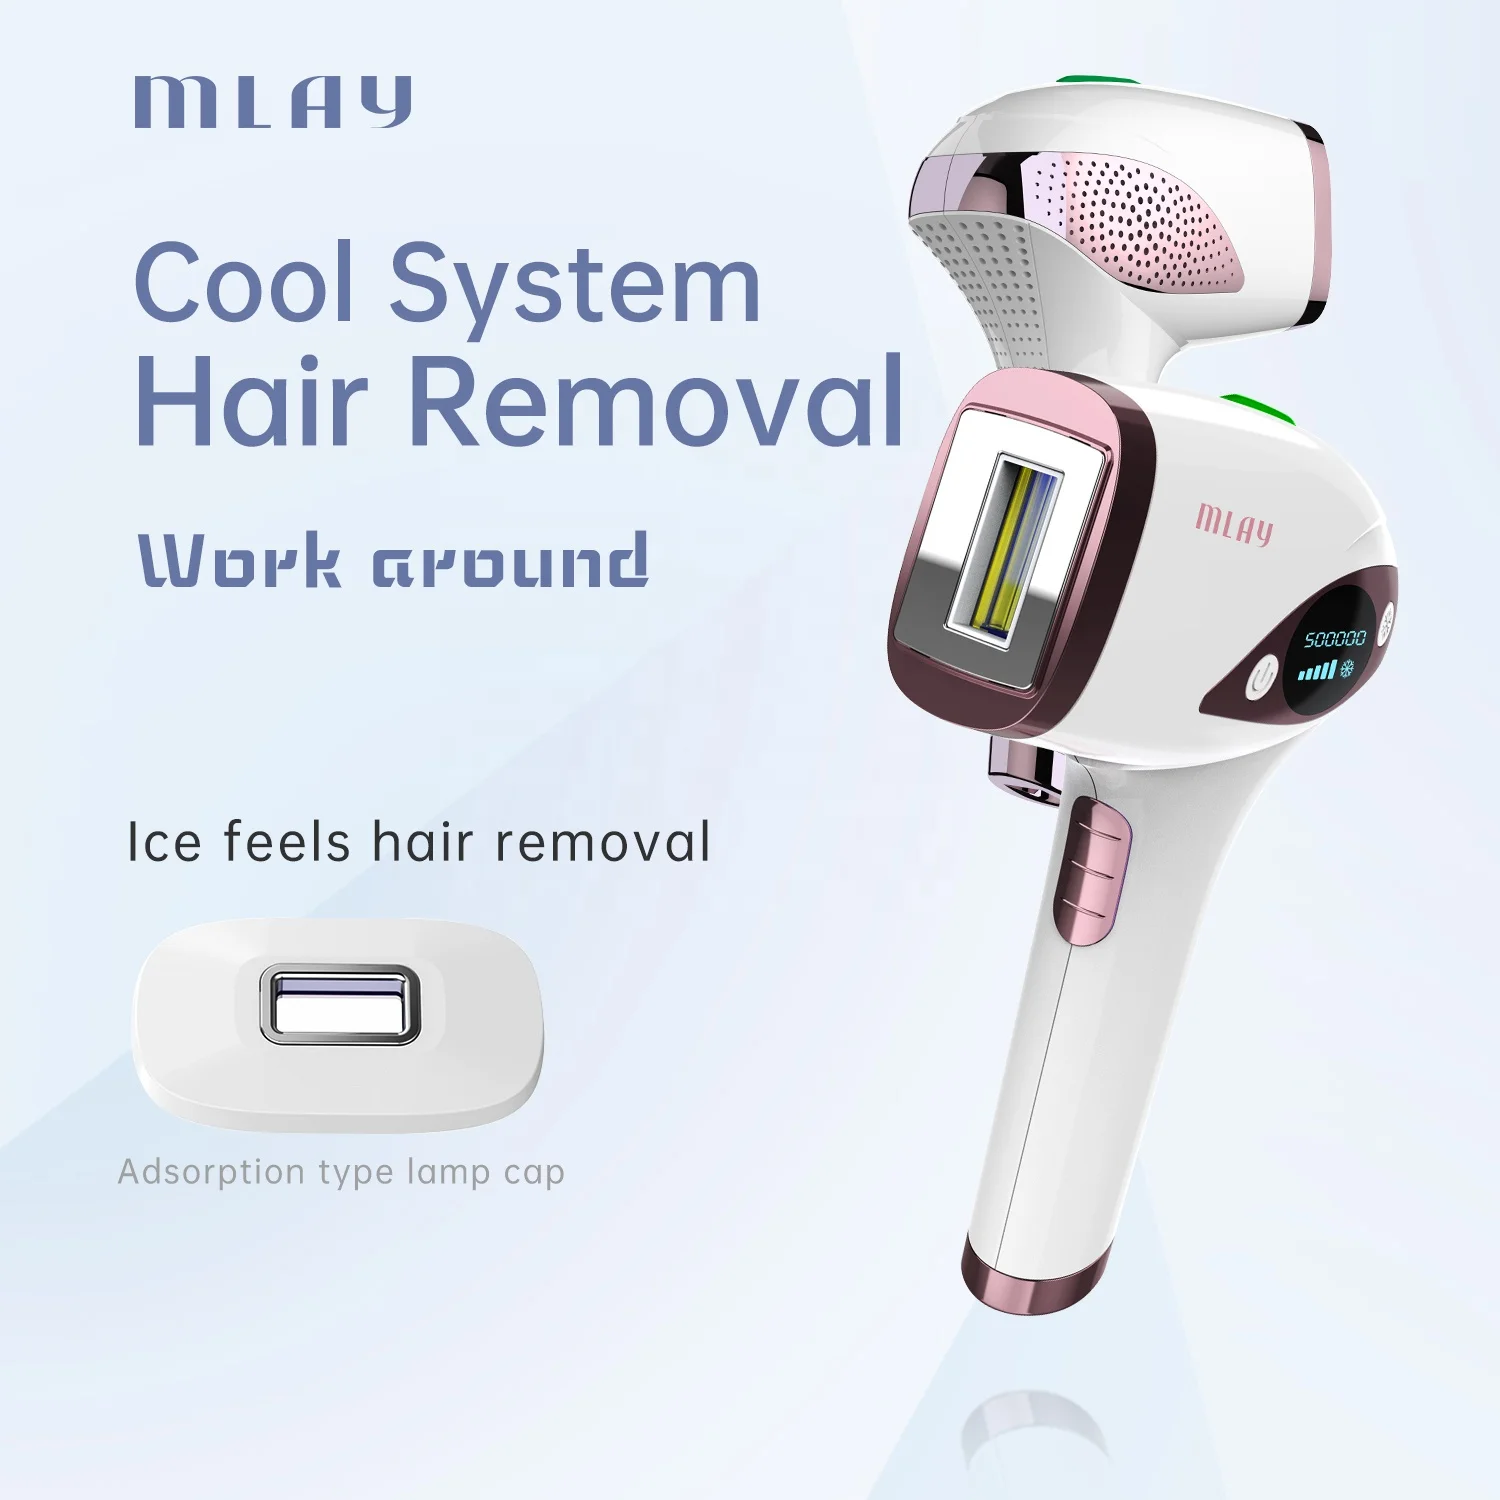 Mlay T4 Good Price Multi-Effect Home Use Laser Epilator Portable Ice Cool Ipl Hair Removal Machine